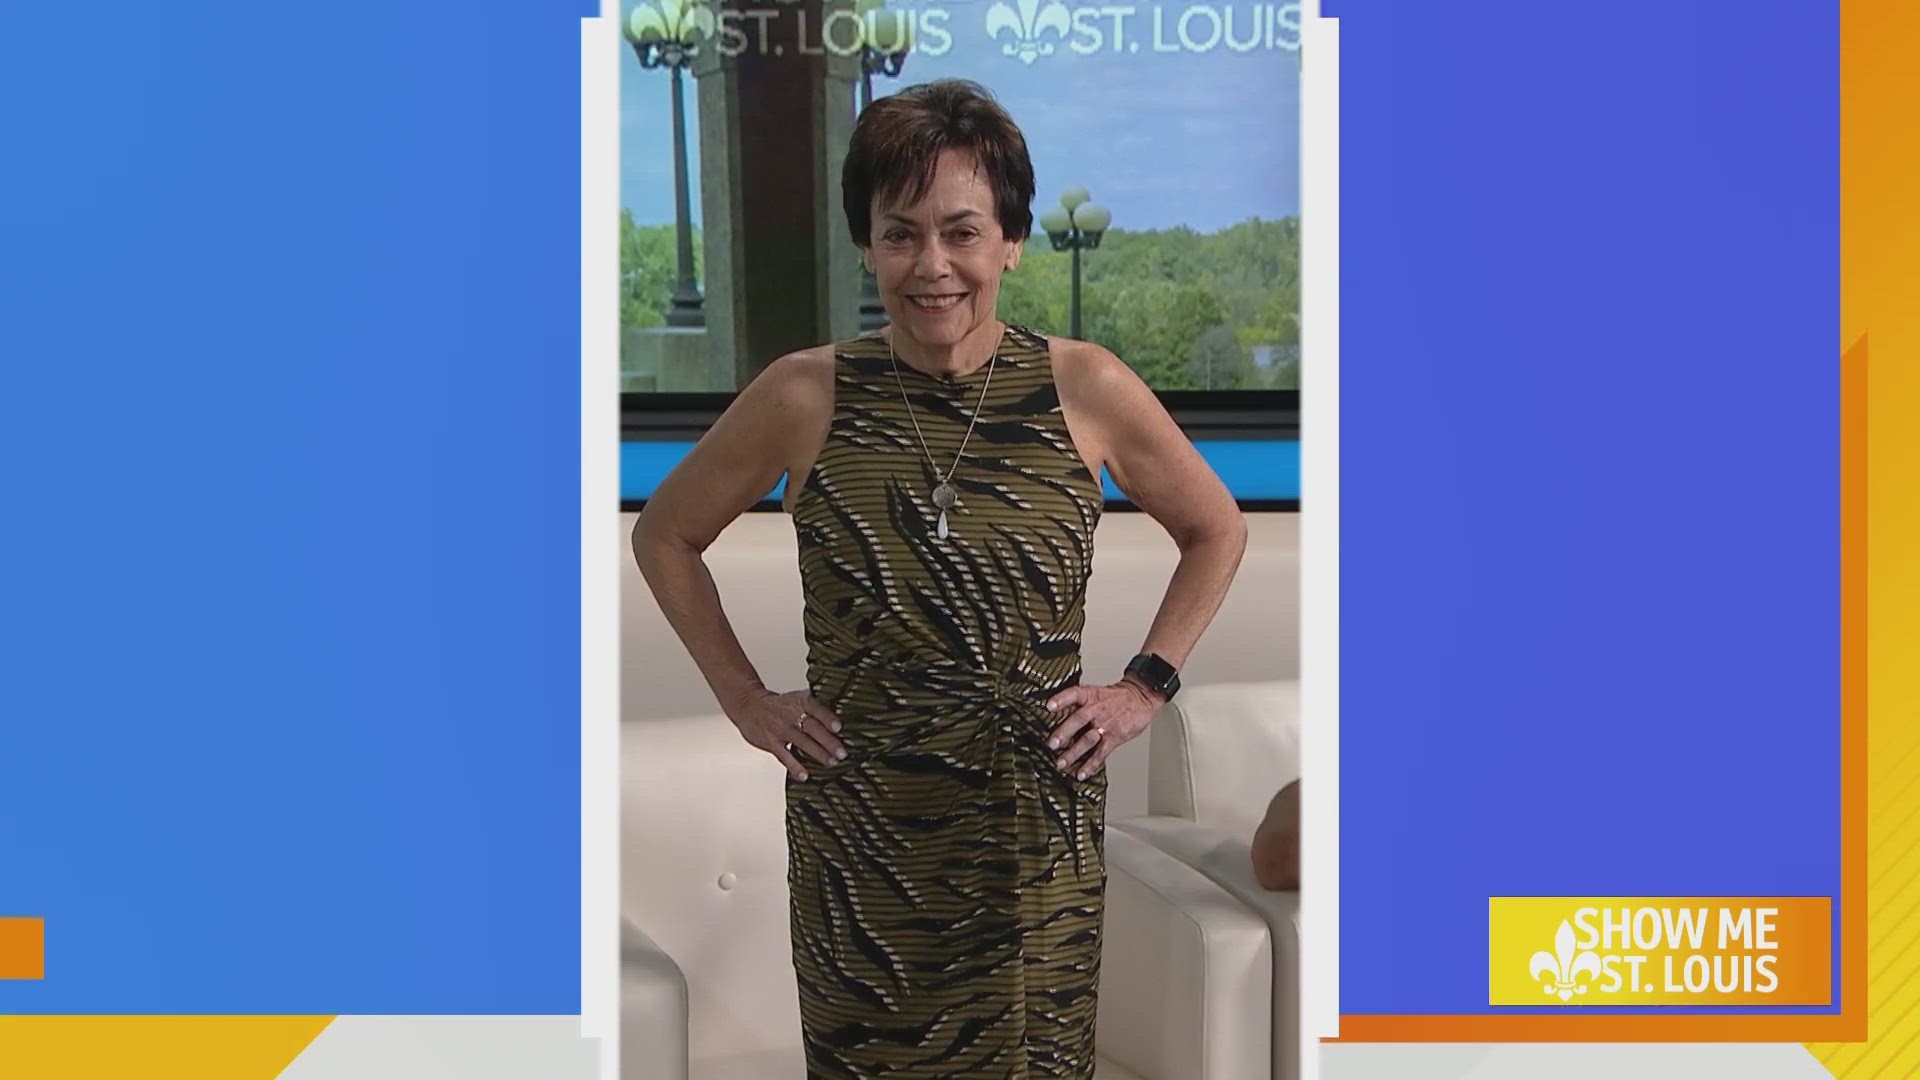 Ann Cordeal lost 30 pounds with the help of Charles D'Angelo